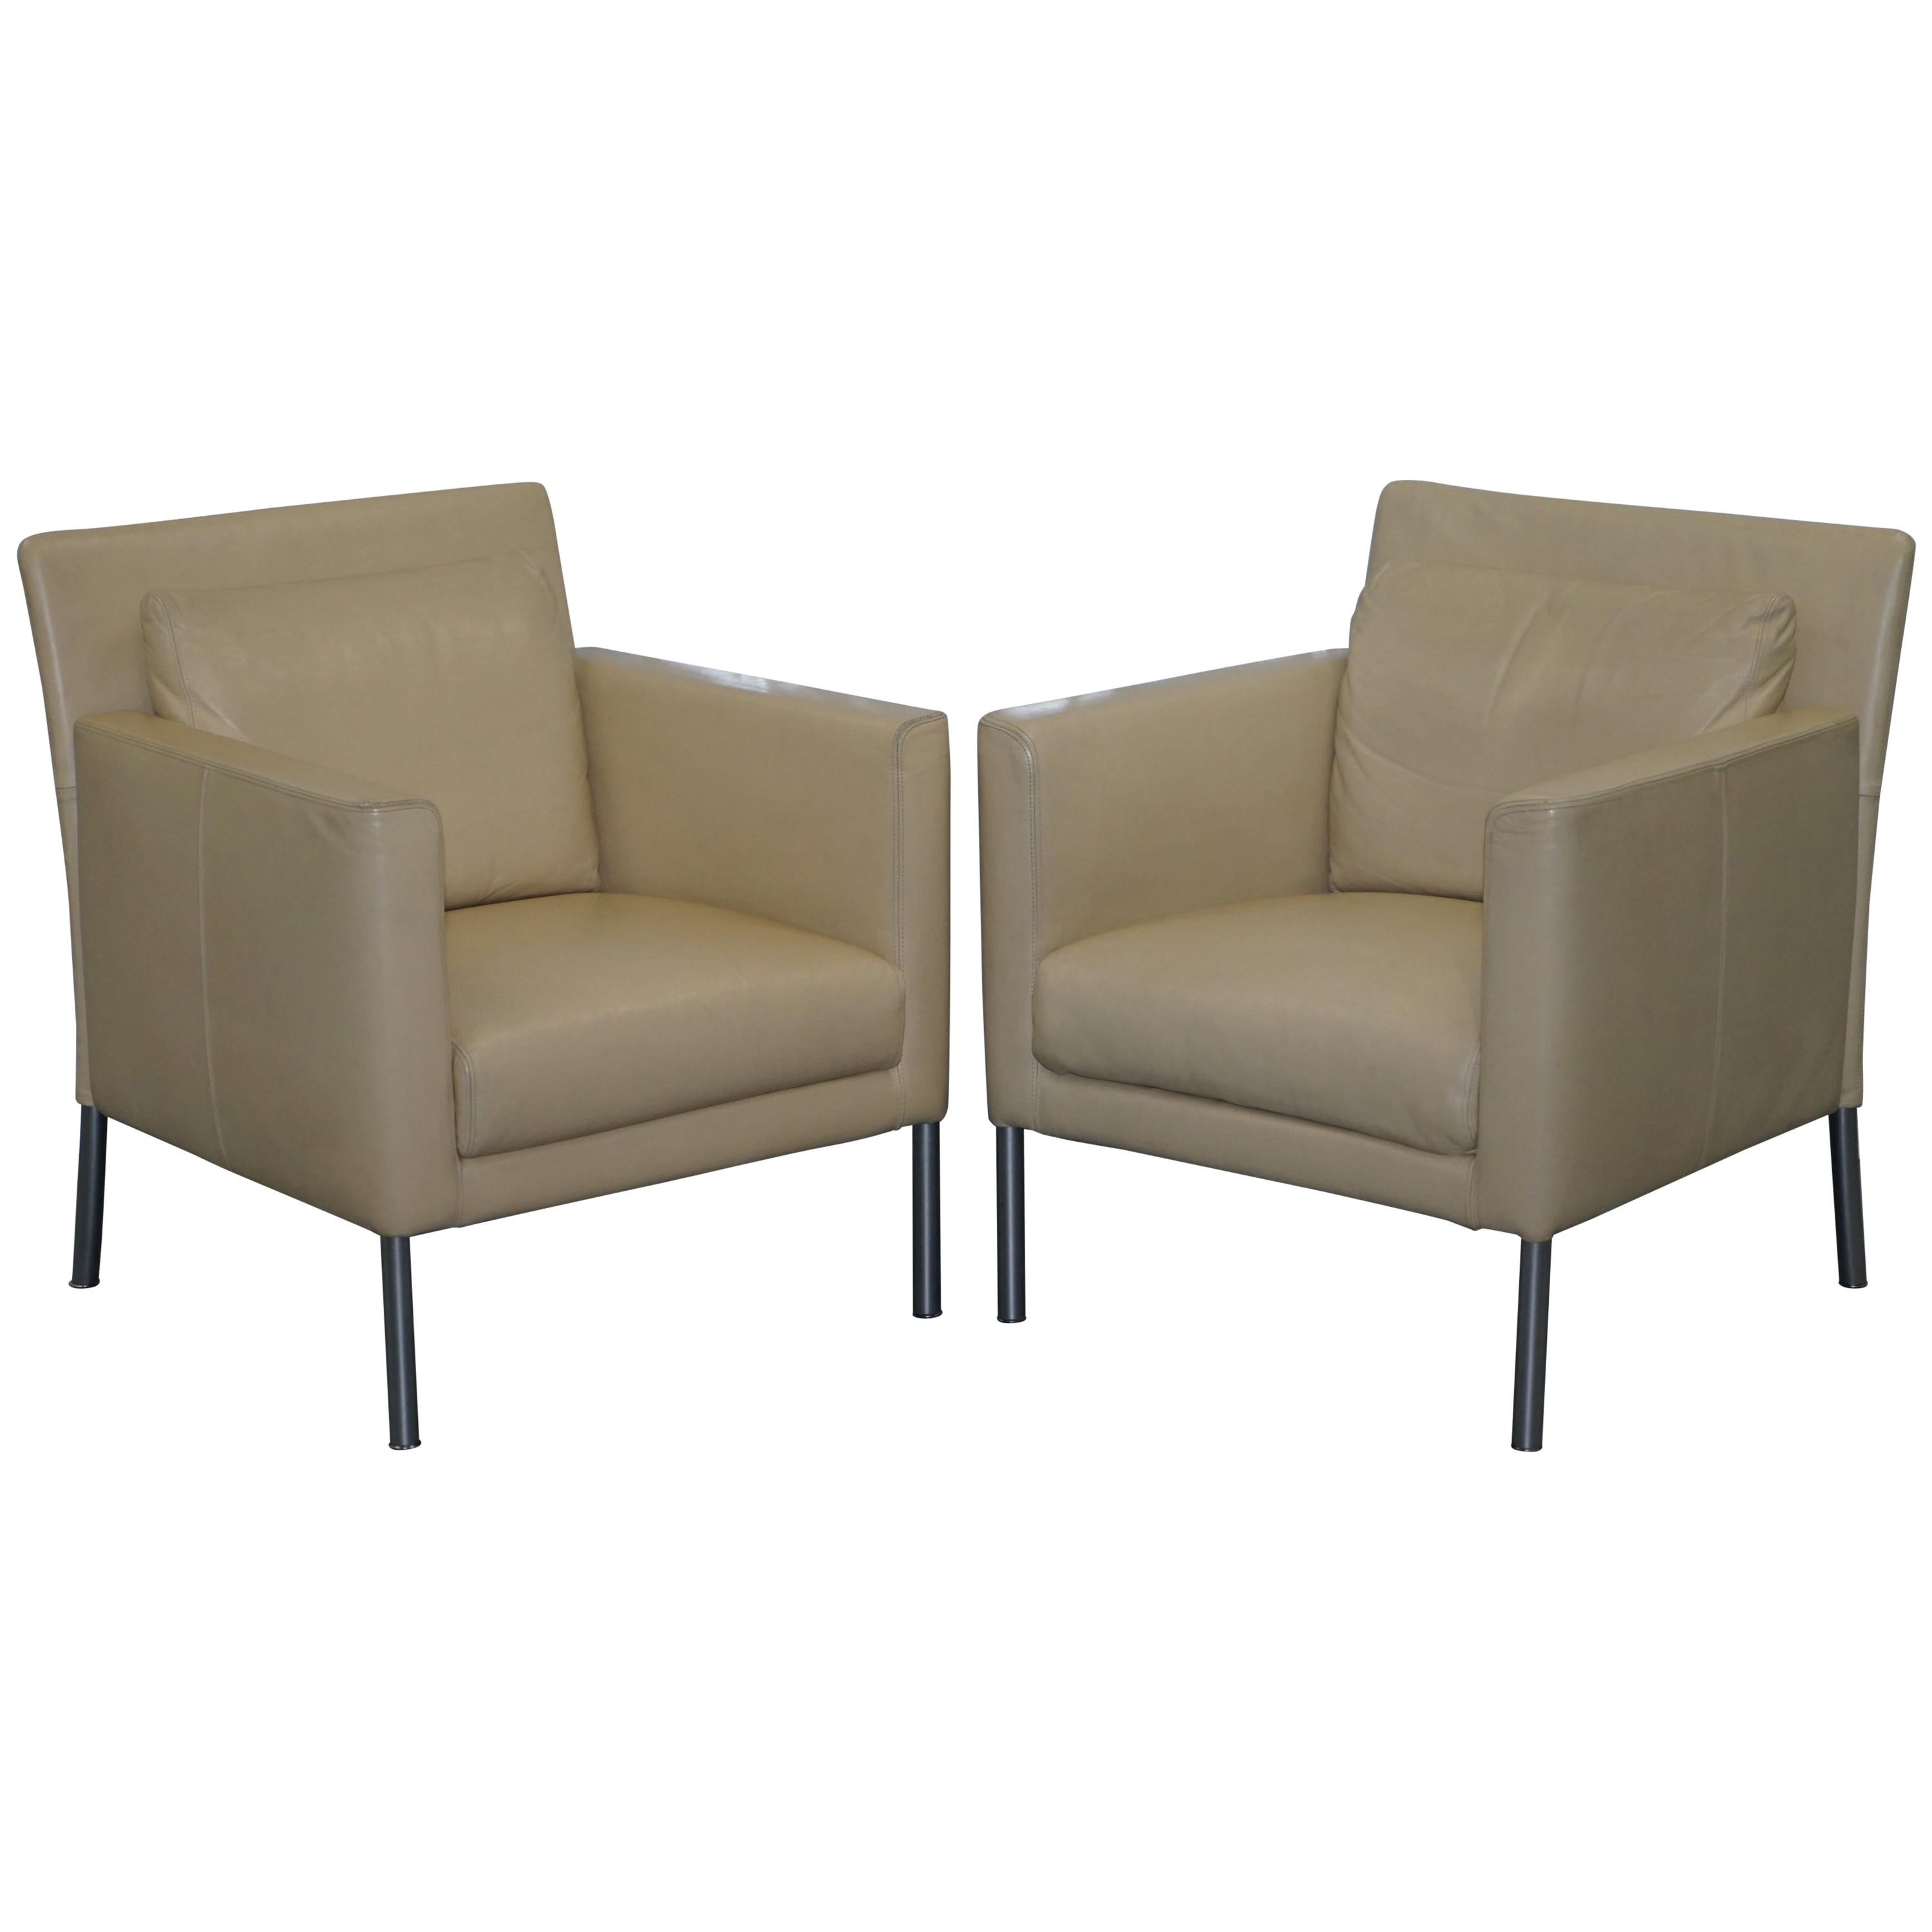 Pair of Walter Knoll Jason 391 Cream Leather Contemporary Armchairs